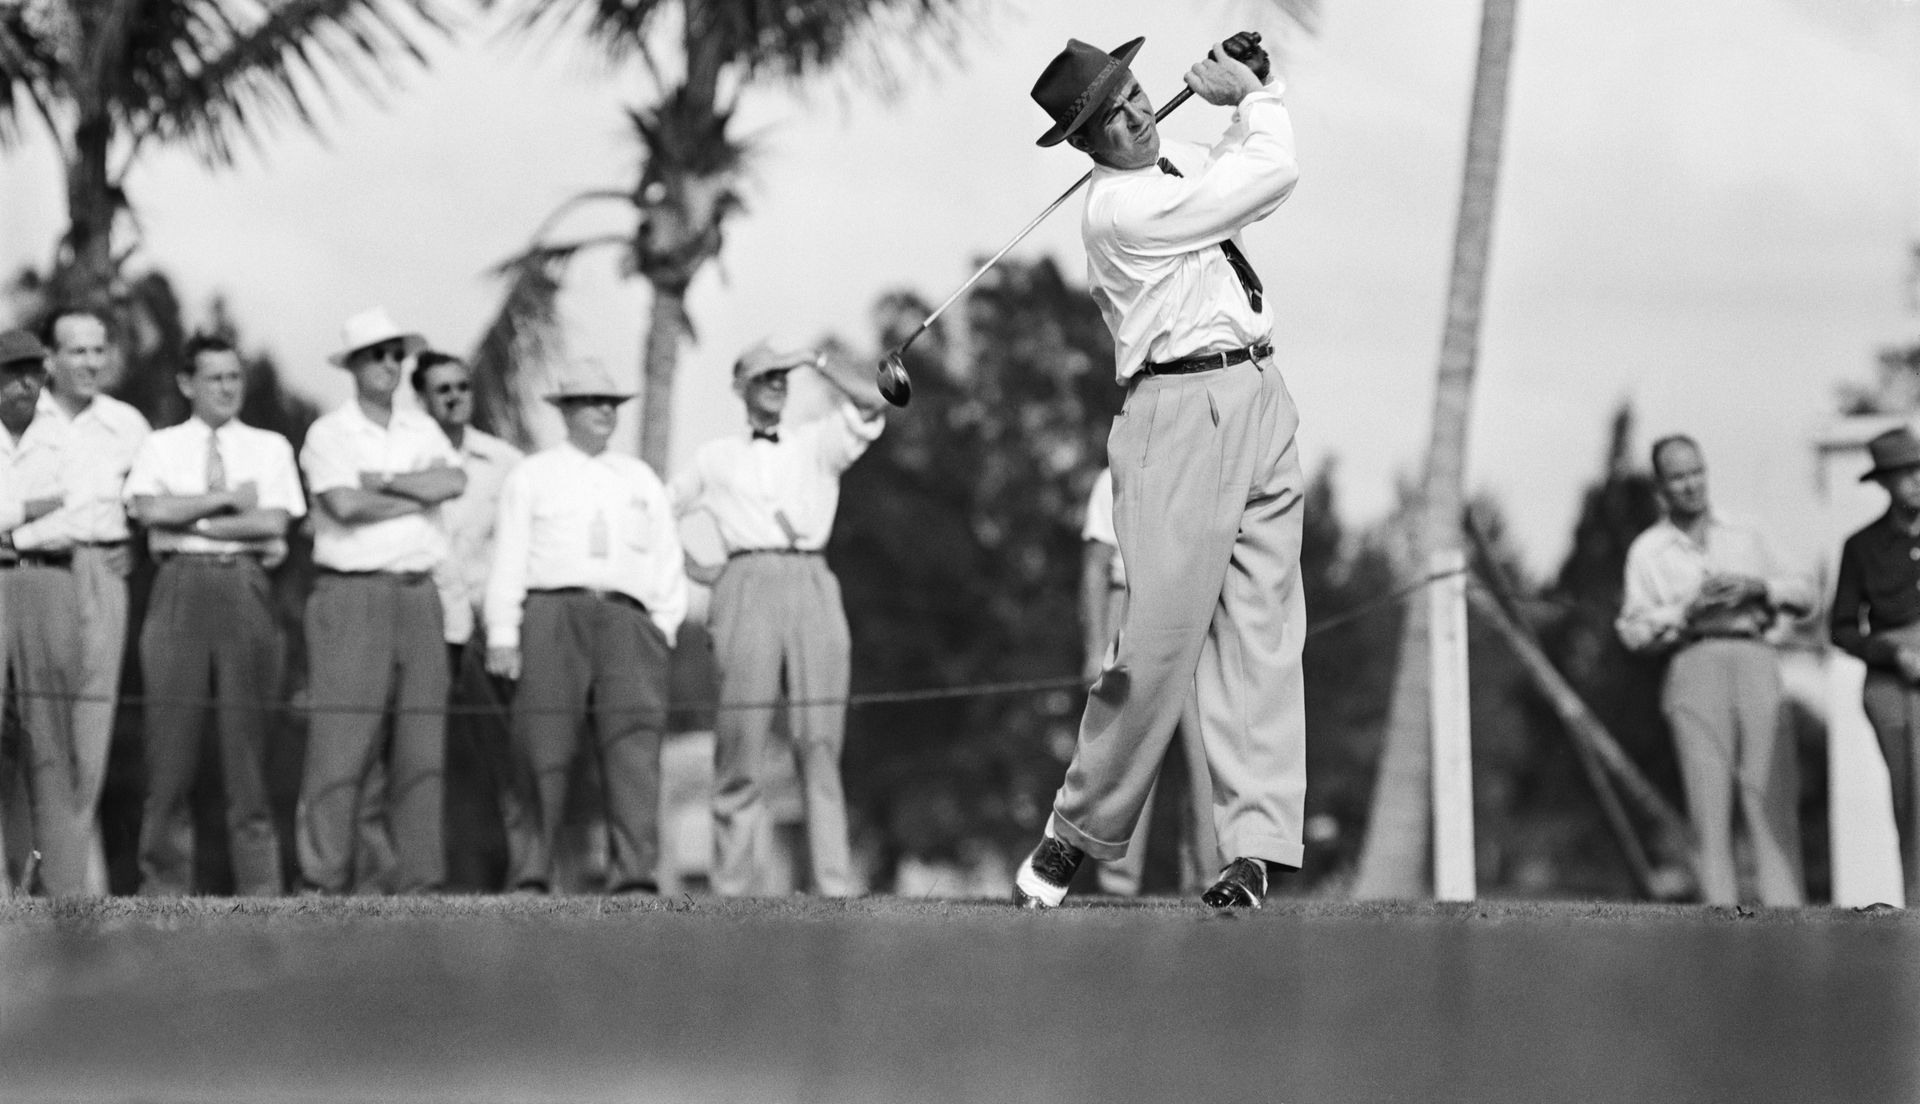 <p>                     There’s not a great of the game who hasn’t passed comment on the legendary Sam Snead’s golf swing and ball-striking prowess. Tiger, Jack, Player… they’ve all gushed over the wonderfully loose and rhythmical action of the 82-time PGA Tour (seven Major Championships) winner at some point. “Perfect” is how Nicklaus described it, while Byron Nelson once said, “He had a swing so sweet, you could pour it from a syrup bottle.”                   </p>